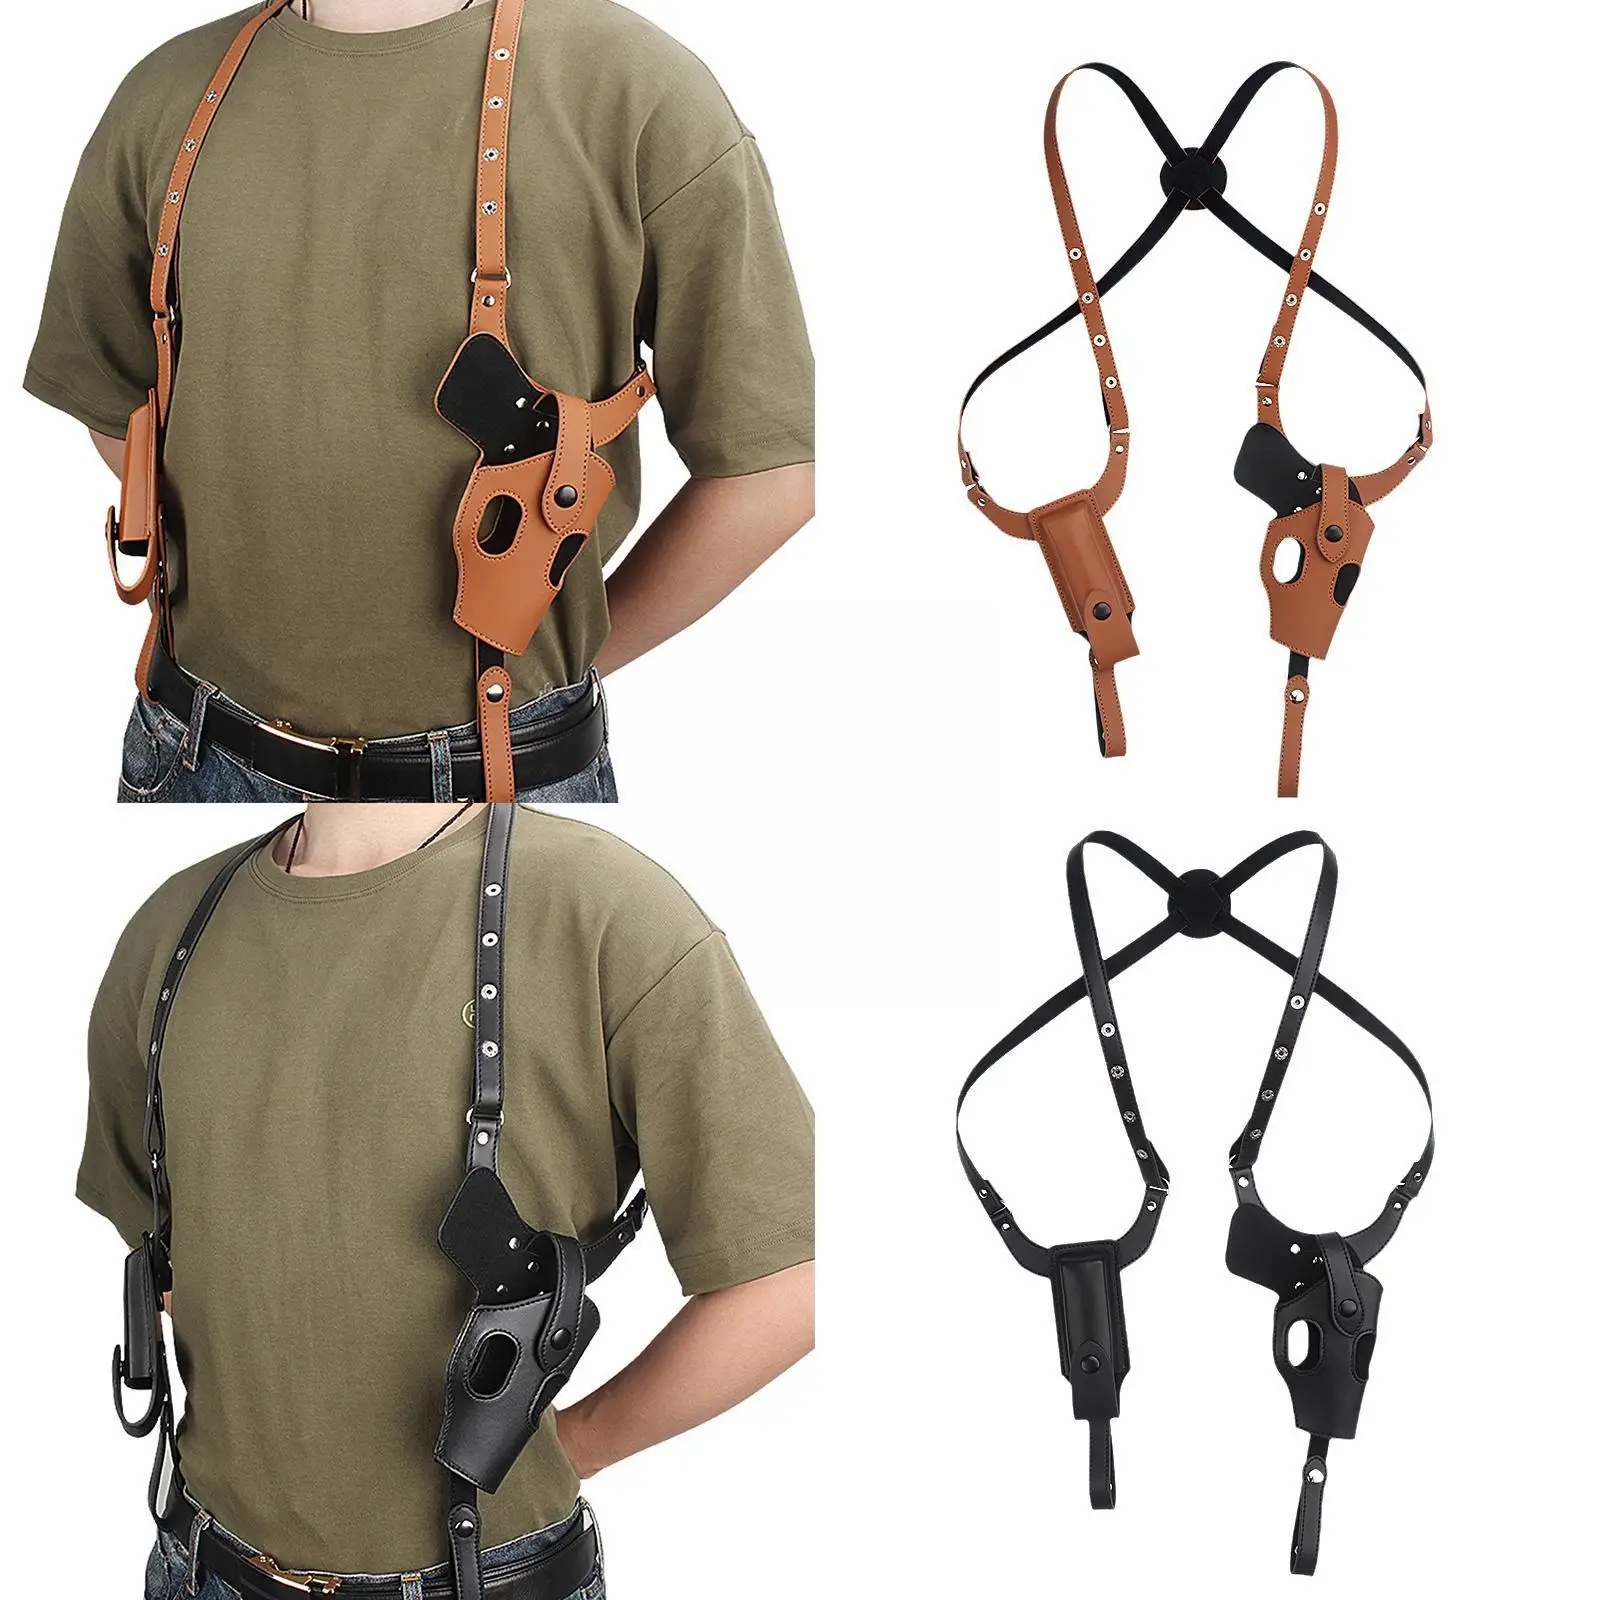 Double Pull Adjustable Holster Underarm Universal Invisible Shoulder Carry Bag Vertic U7d1